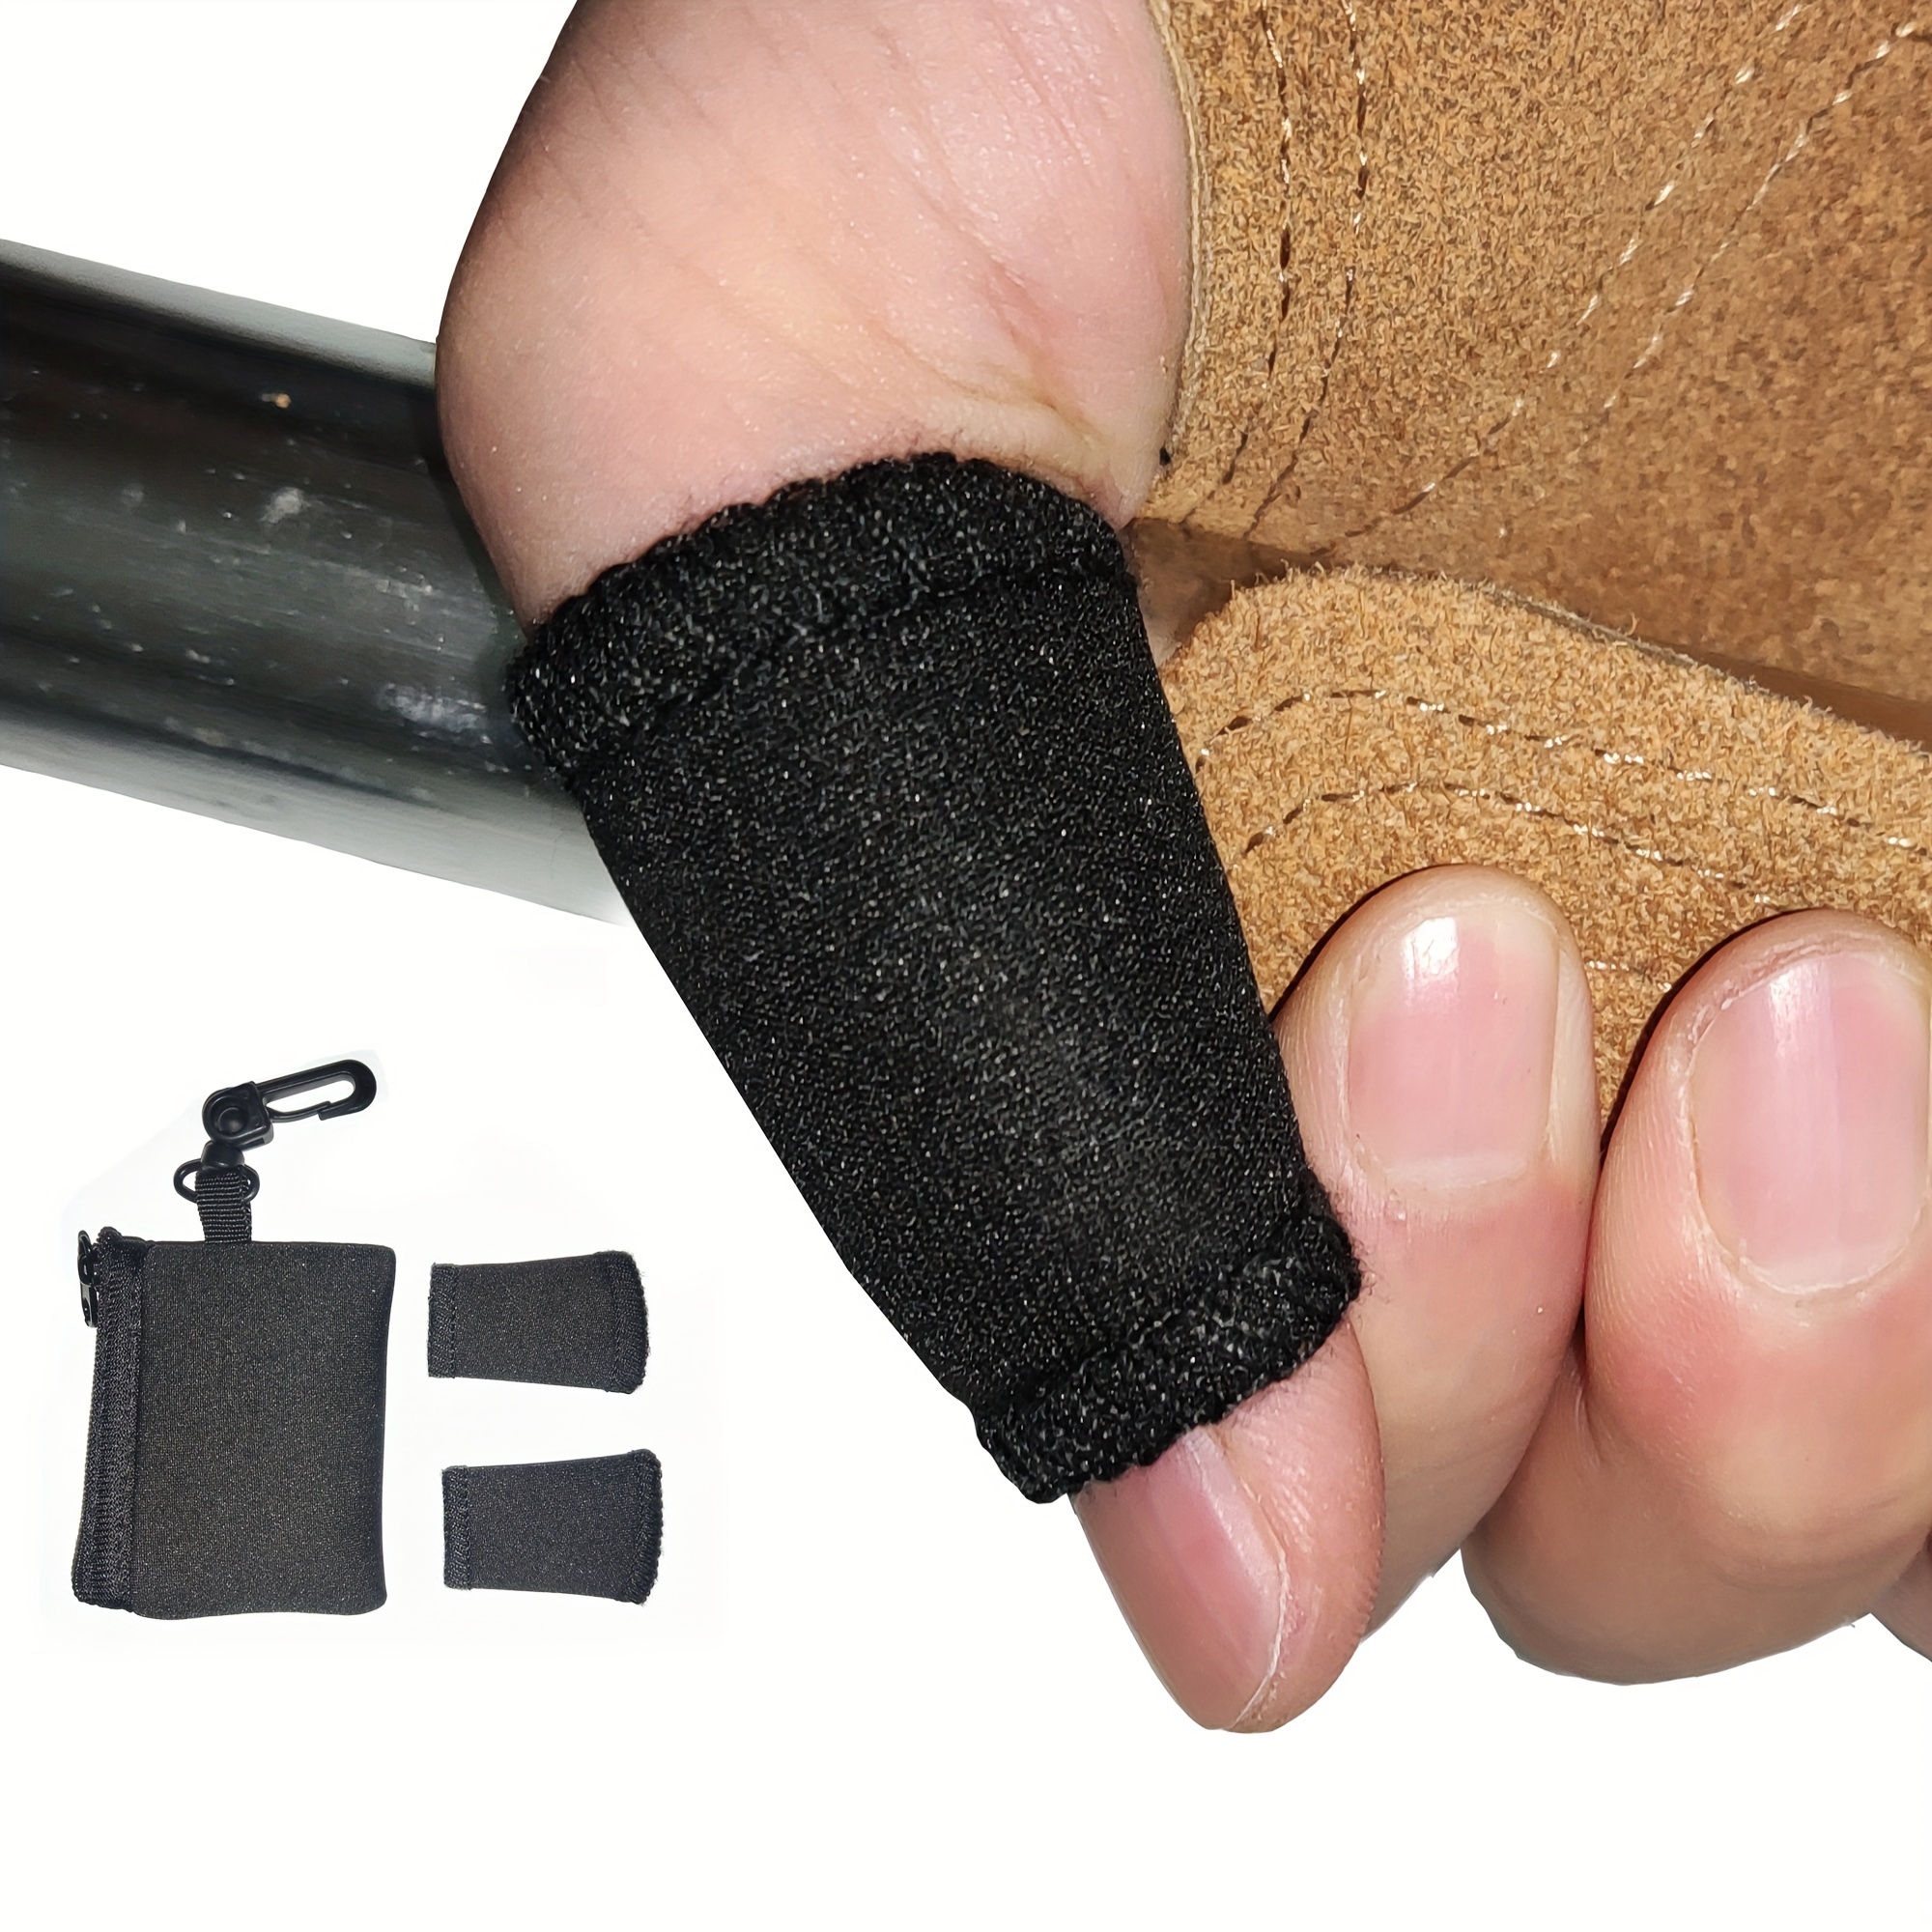 How To Use Thumb Tape For: Weightlifting, CrossFit, Hook Grip